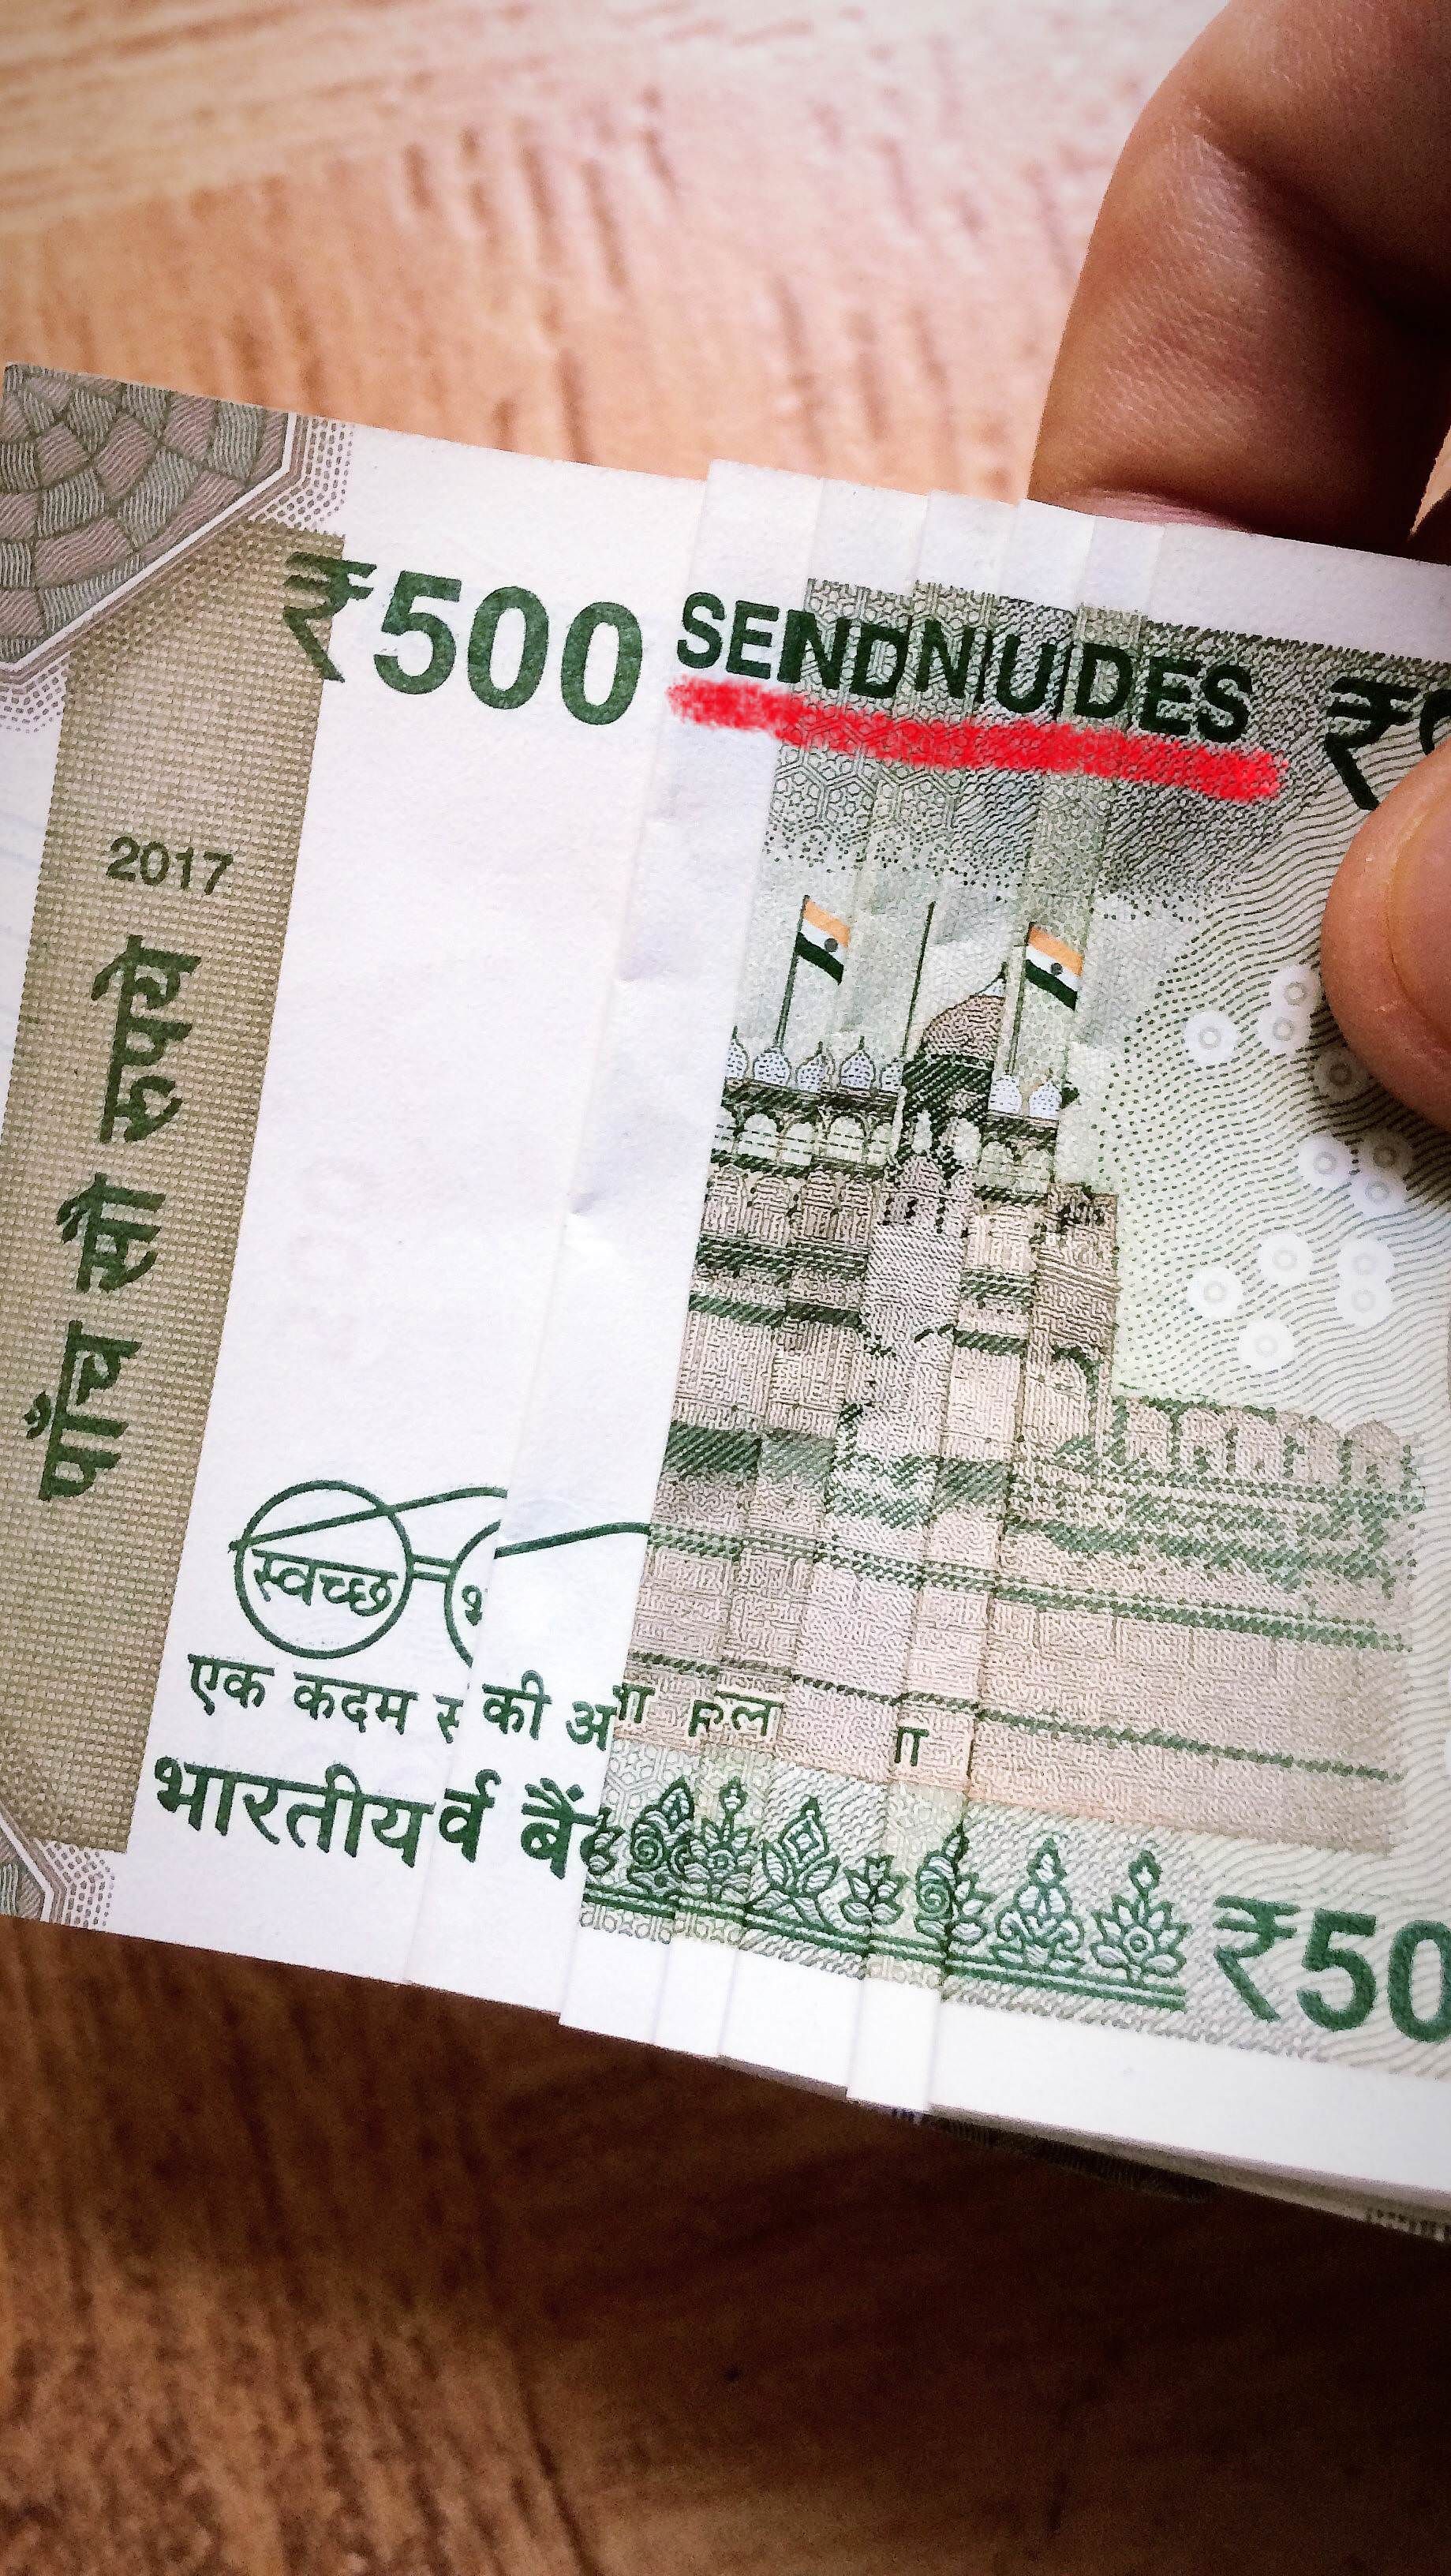 I discovered this cool feature in new Indian Rupee notes, ha!